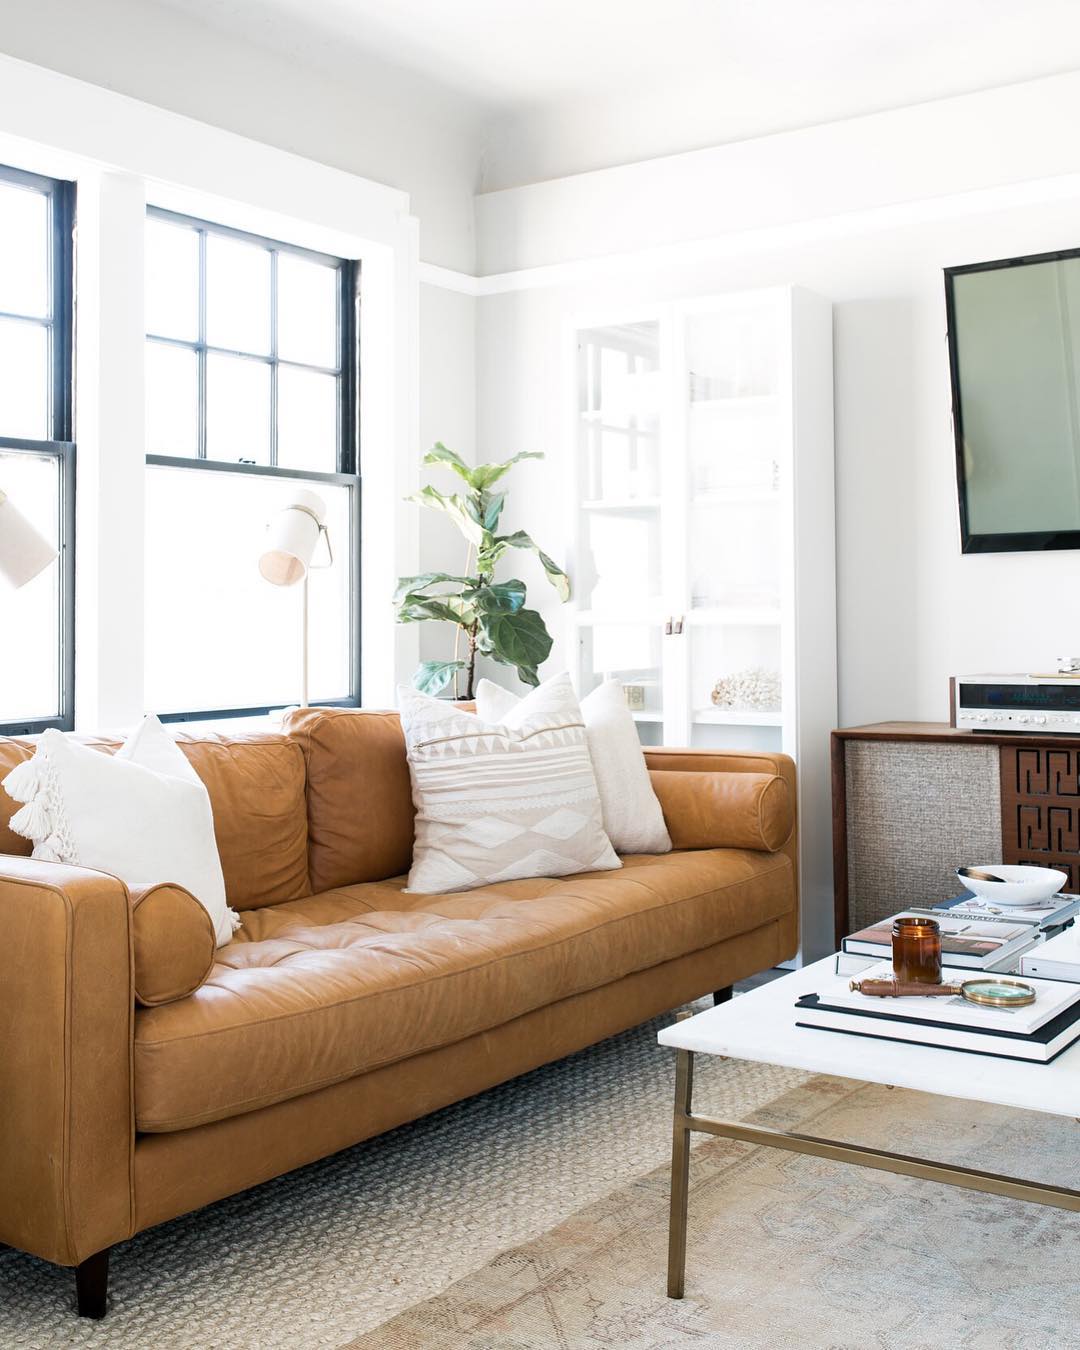 Tan leather couch in front of big window in all-white living room. Photo by Instagram user @nicoledianne